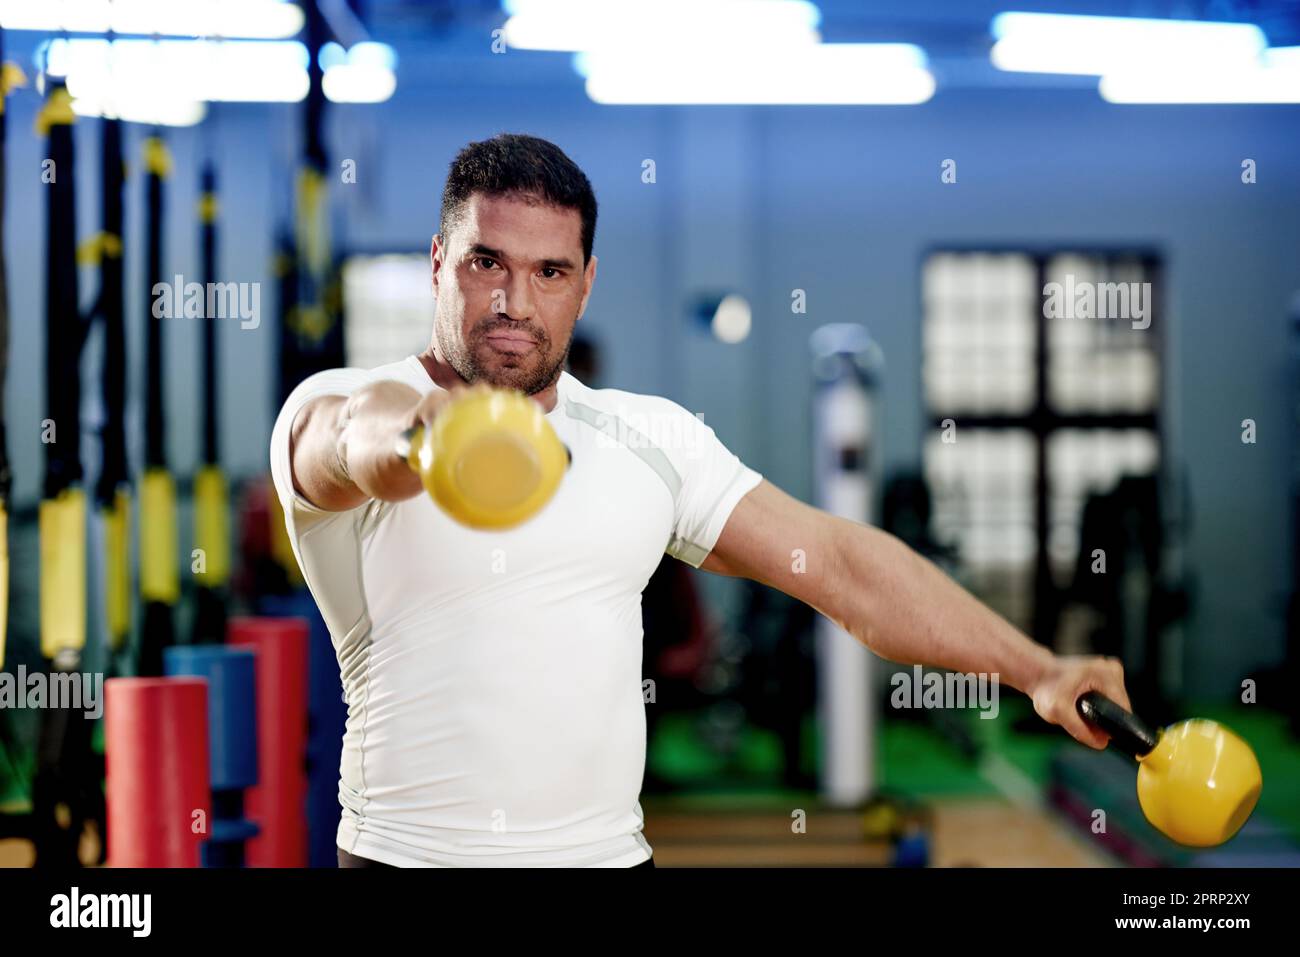 Work out like a winner. a man working out with kettle bells at the gym. Stock Photo